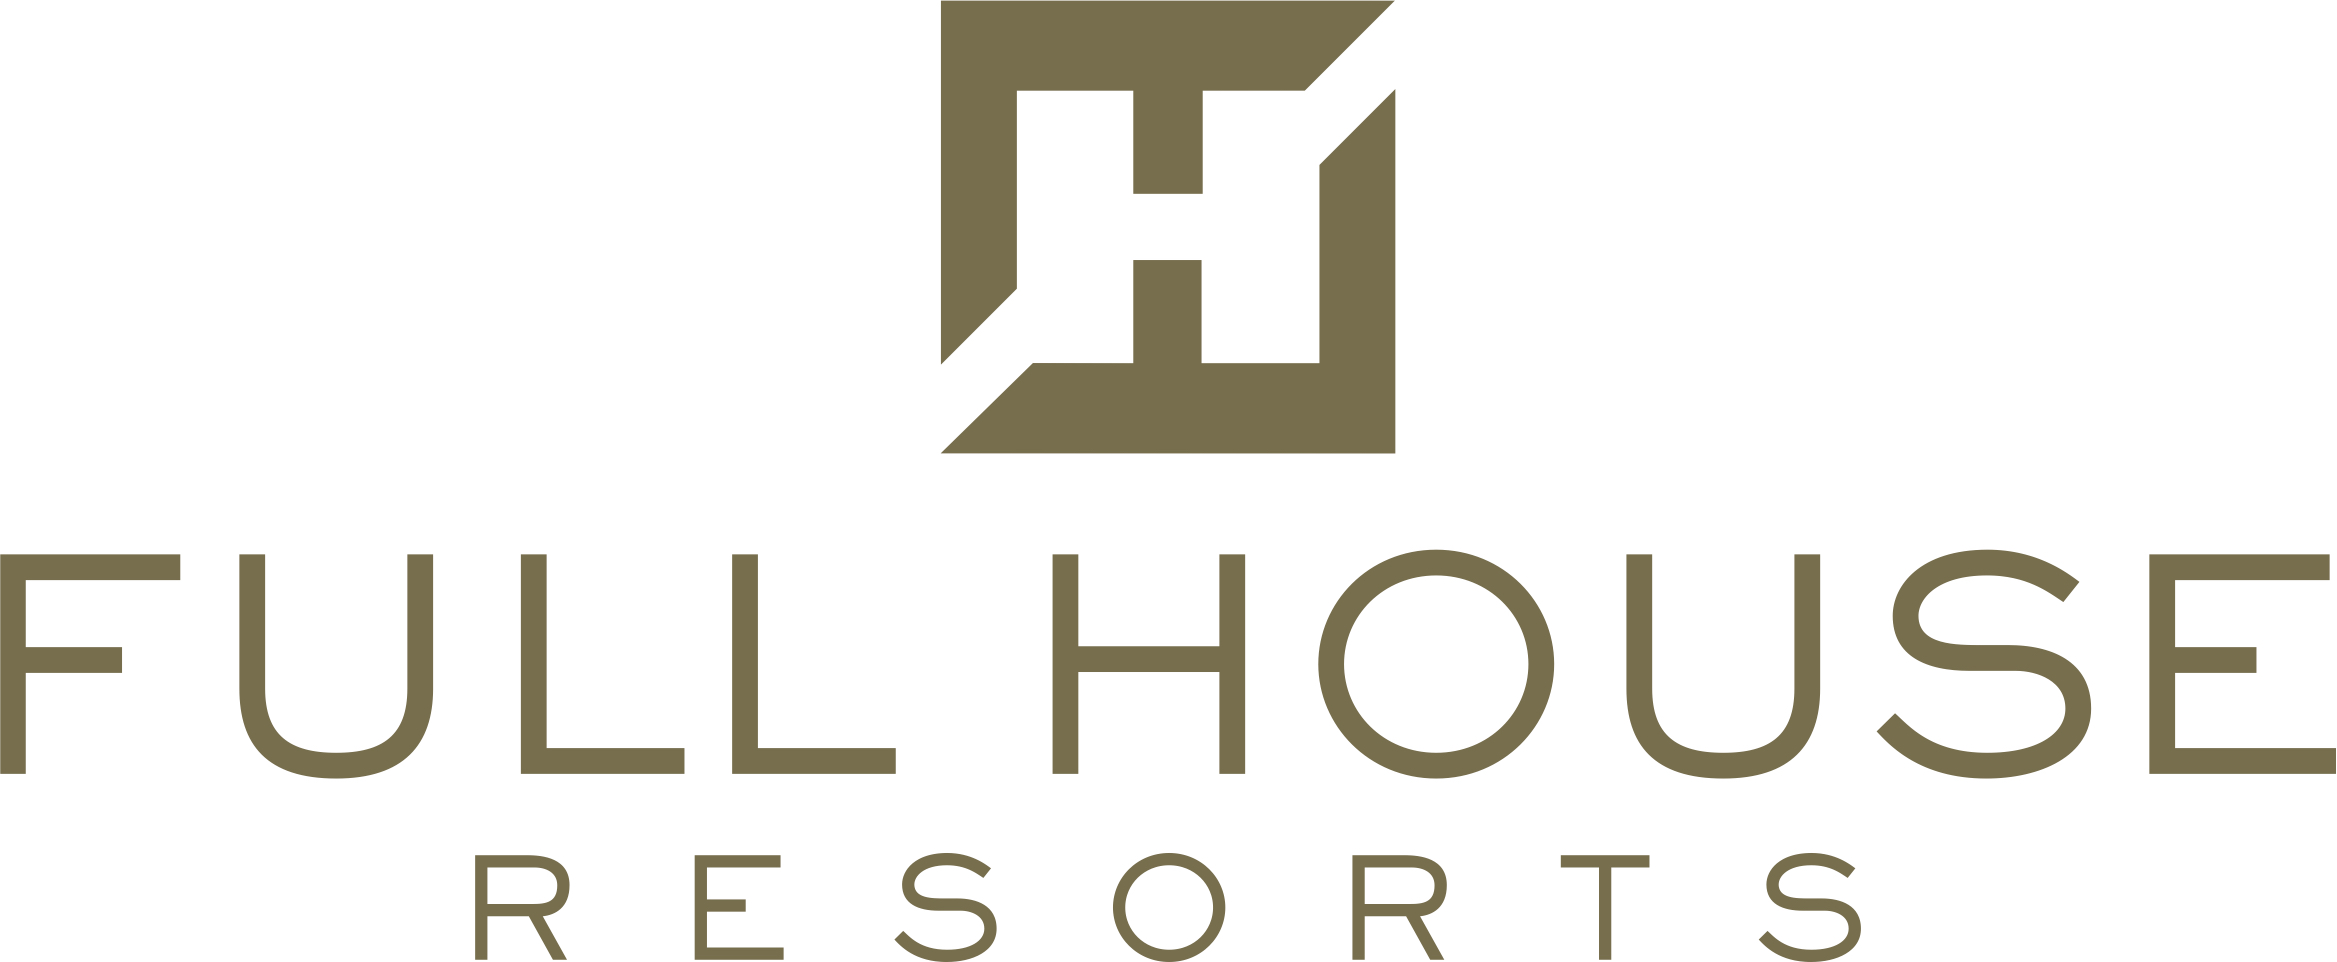 full-house-resorts-announces-second-quarter-results